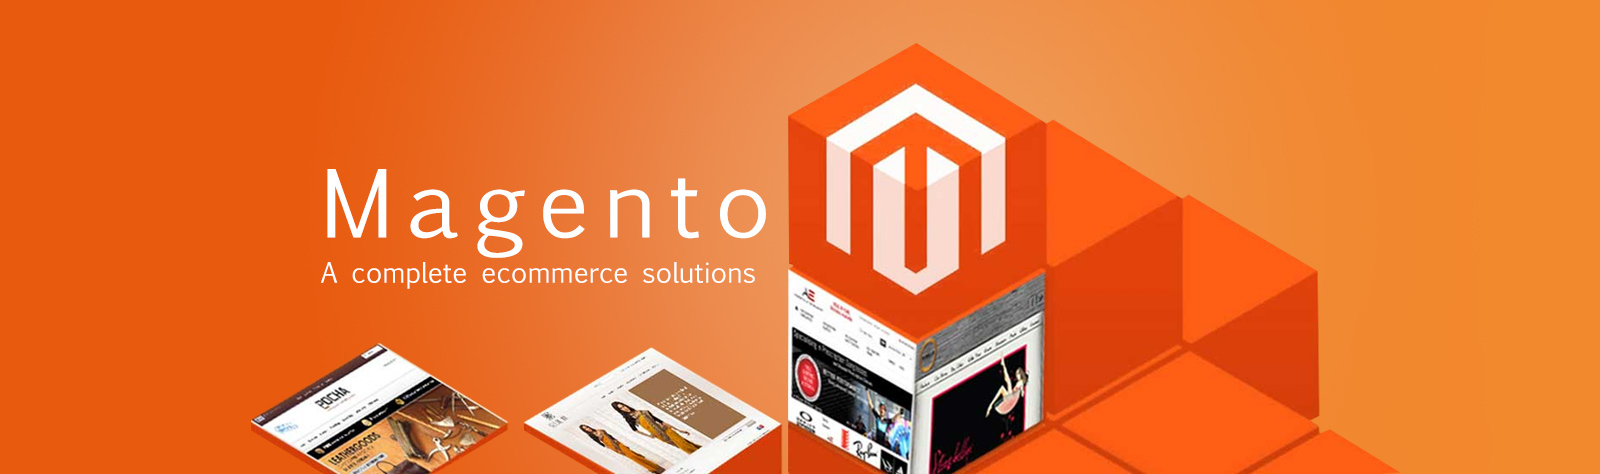 18 Cool Facts About MAGENTO